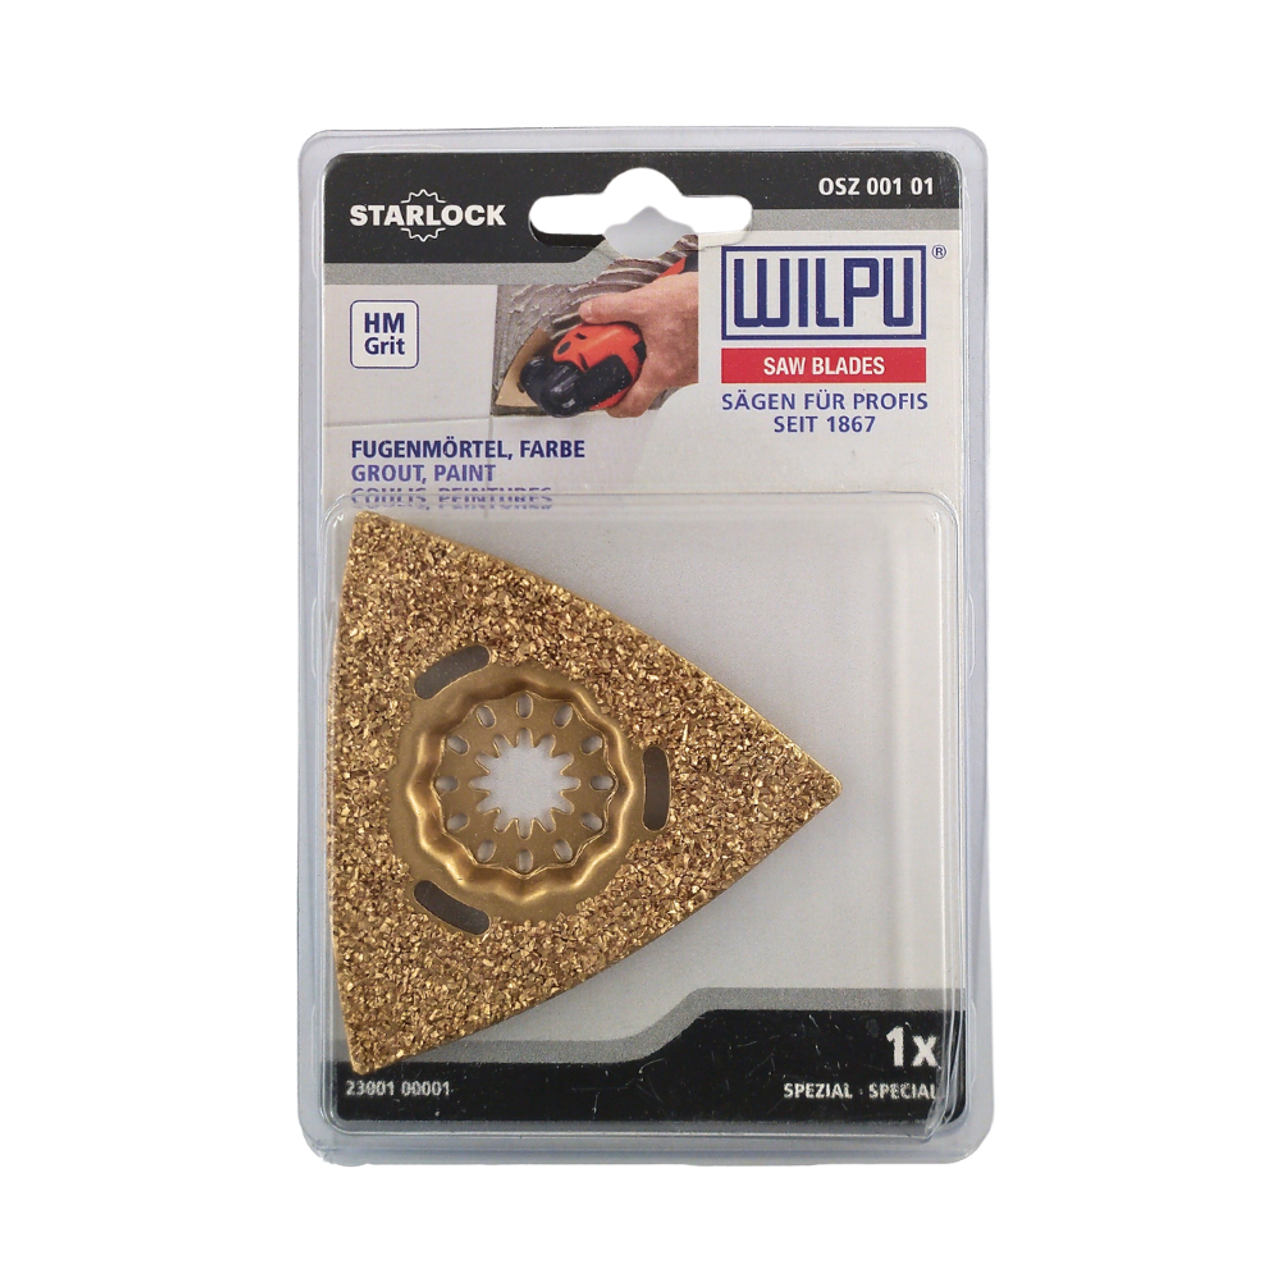 WILPU Multi Tool Blade for Tile, Stone and Wood, the OSZ 001 Saw Blade is for Carbide Rasp for Construction